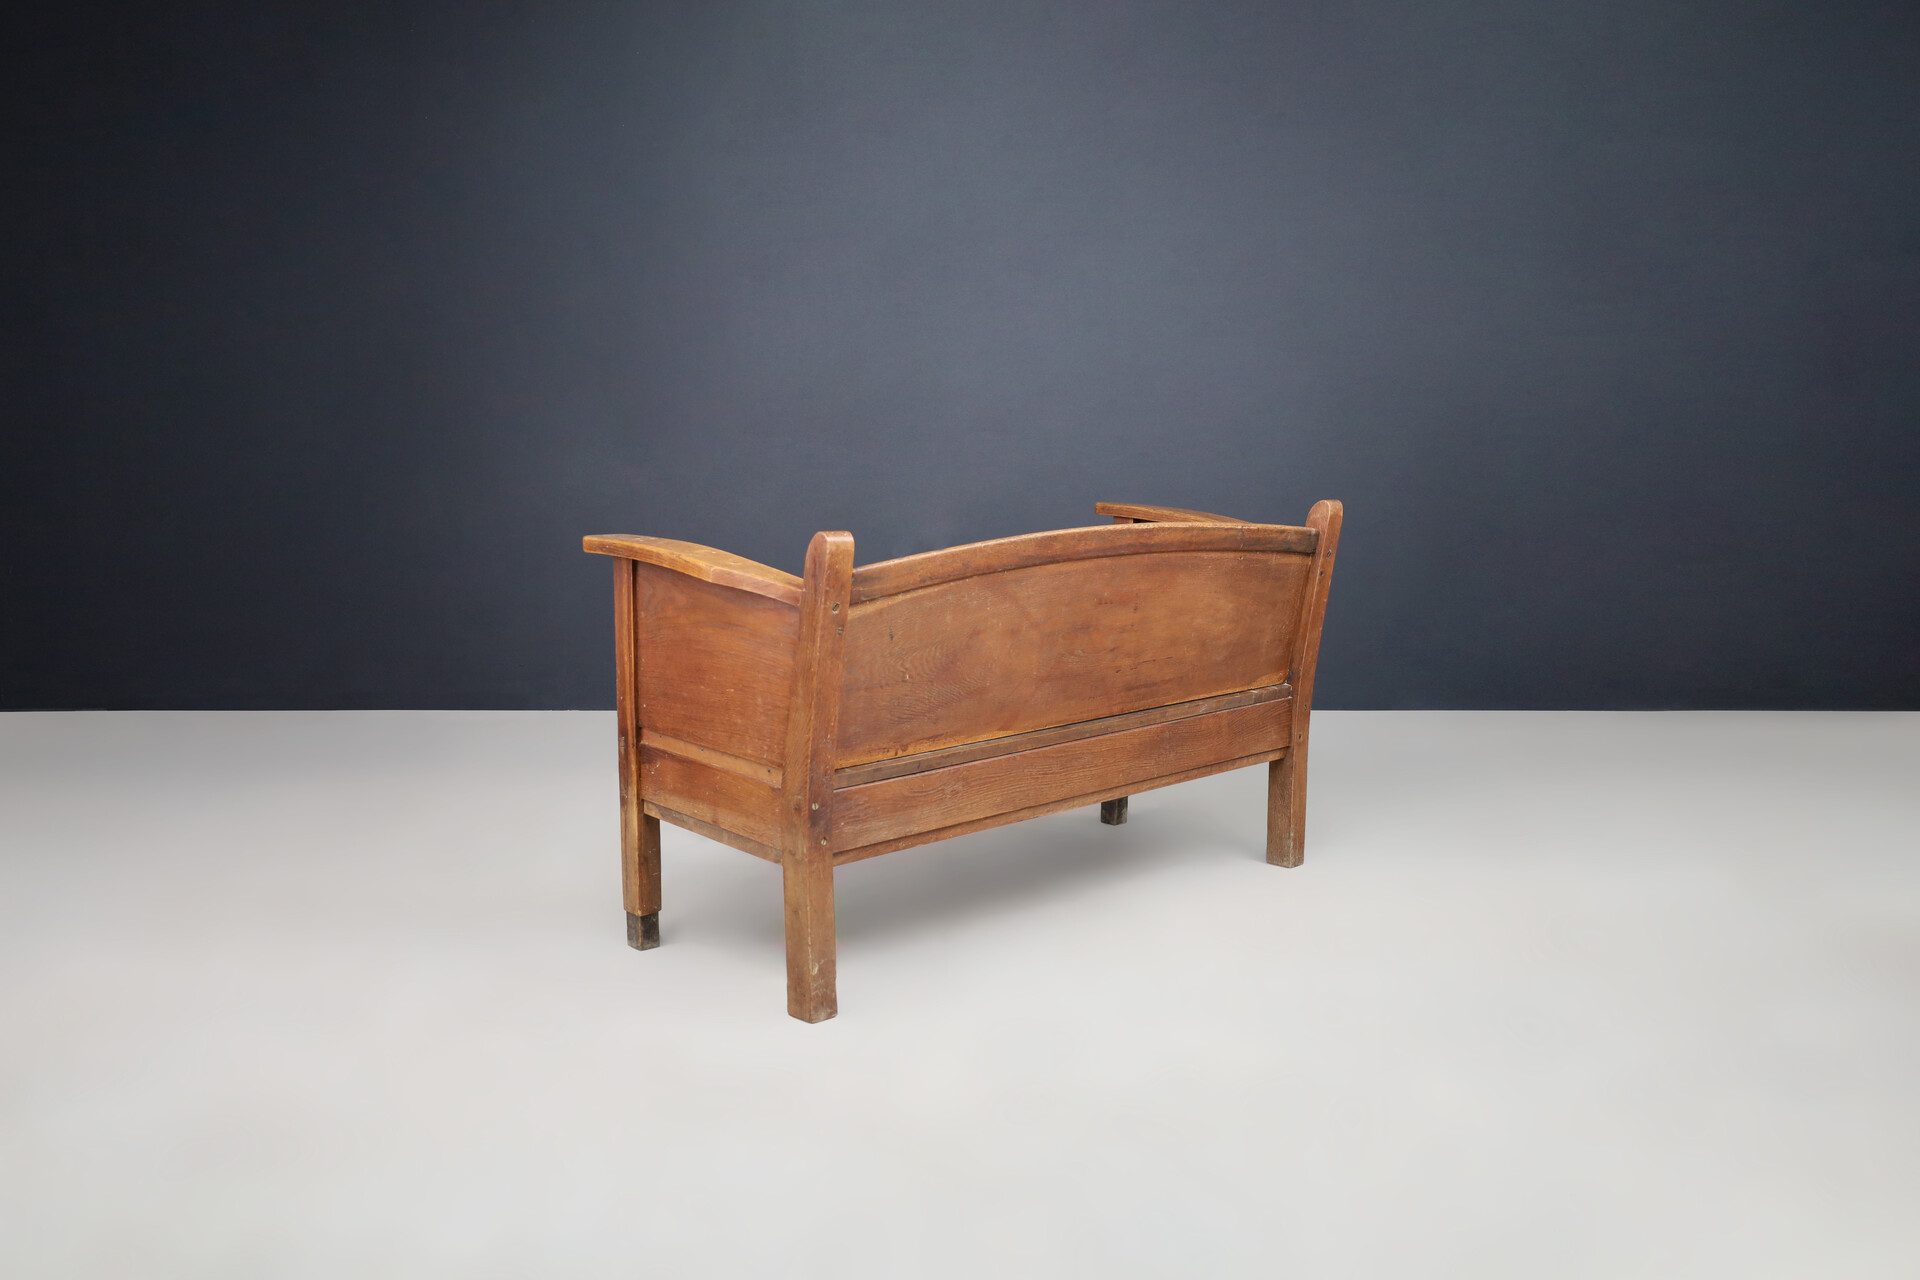 Art Deco Oak and Rush Bench, The Netherlands 1930s Early-20th century